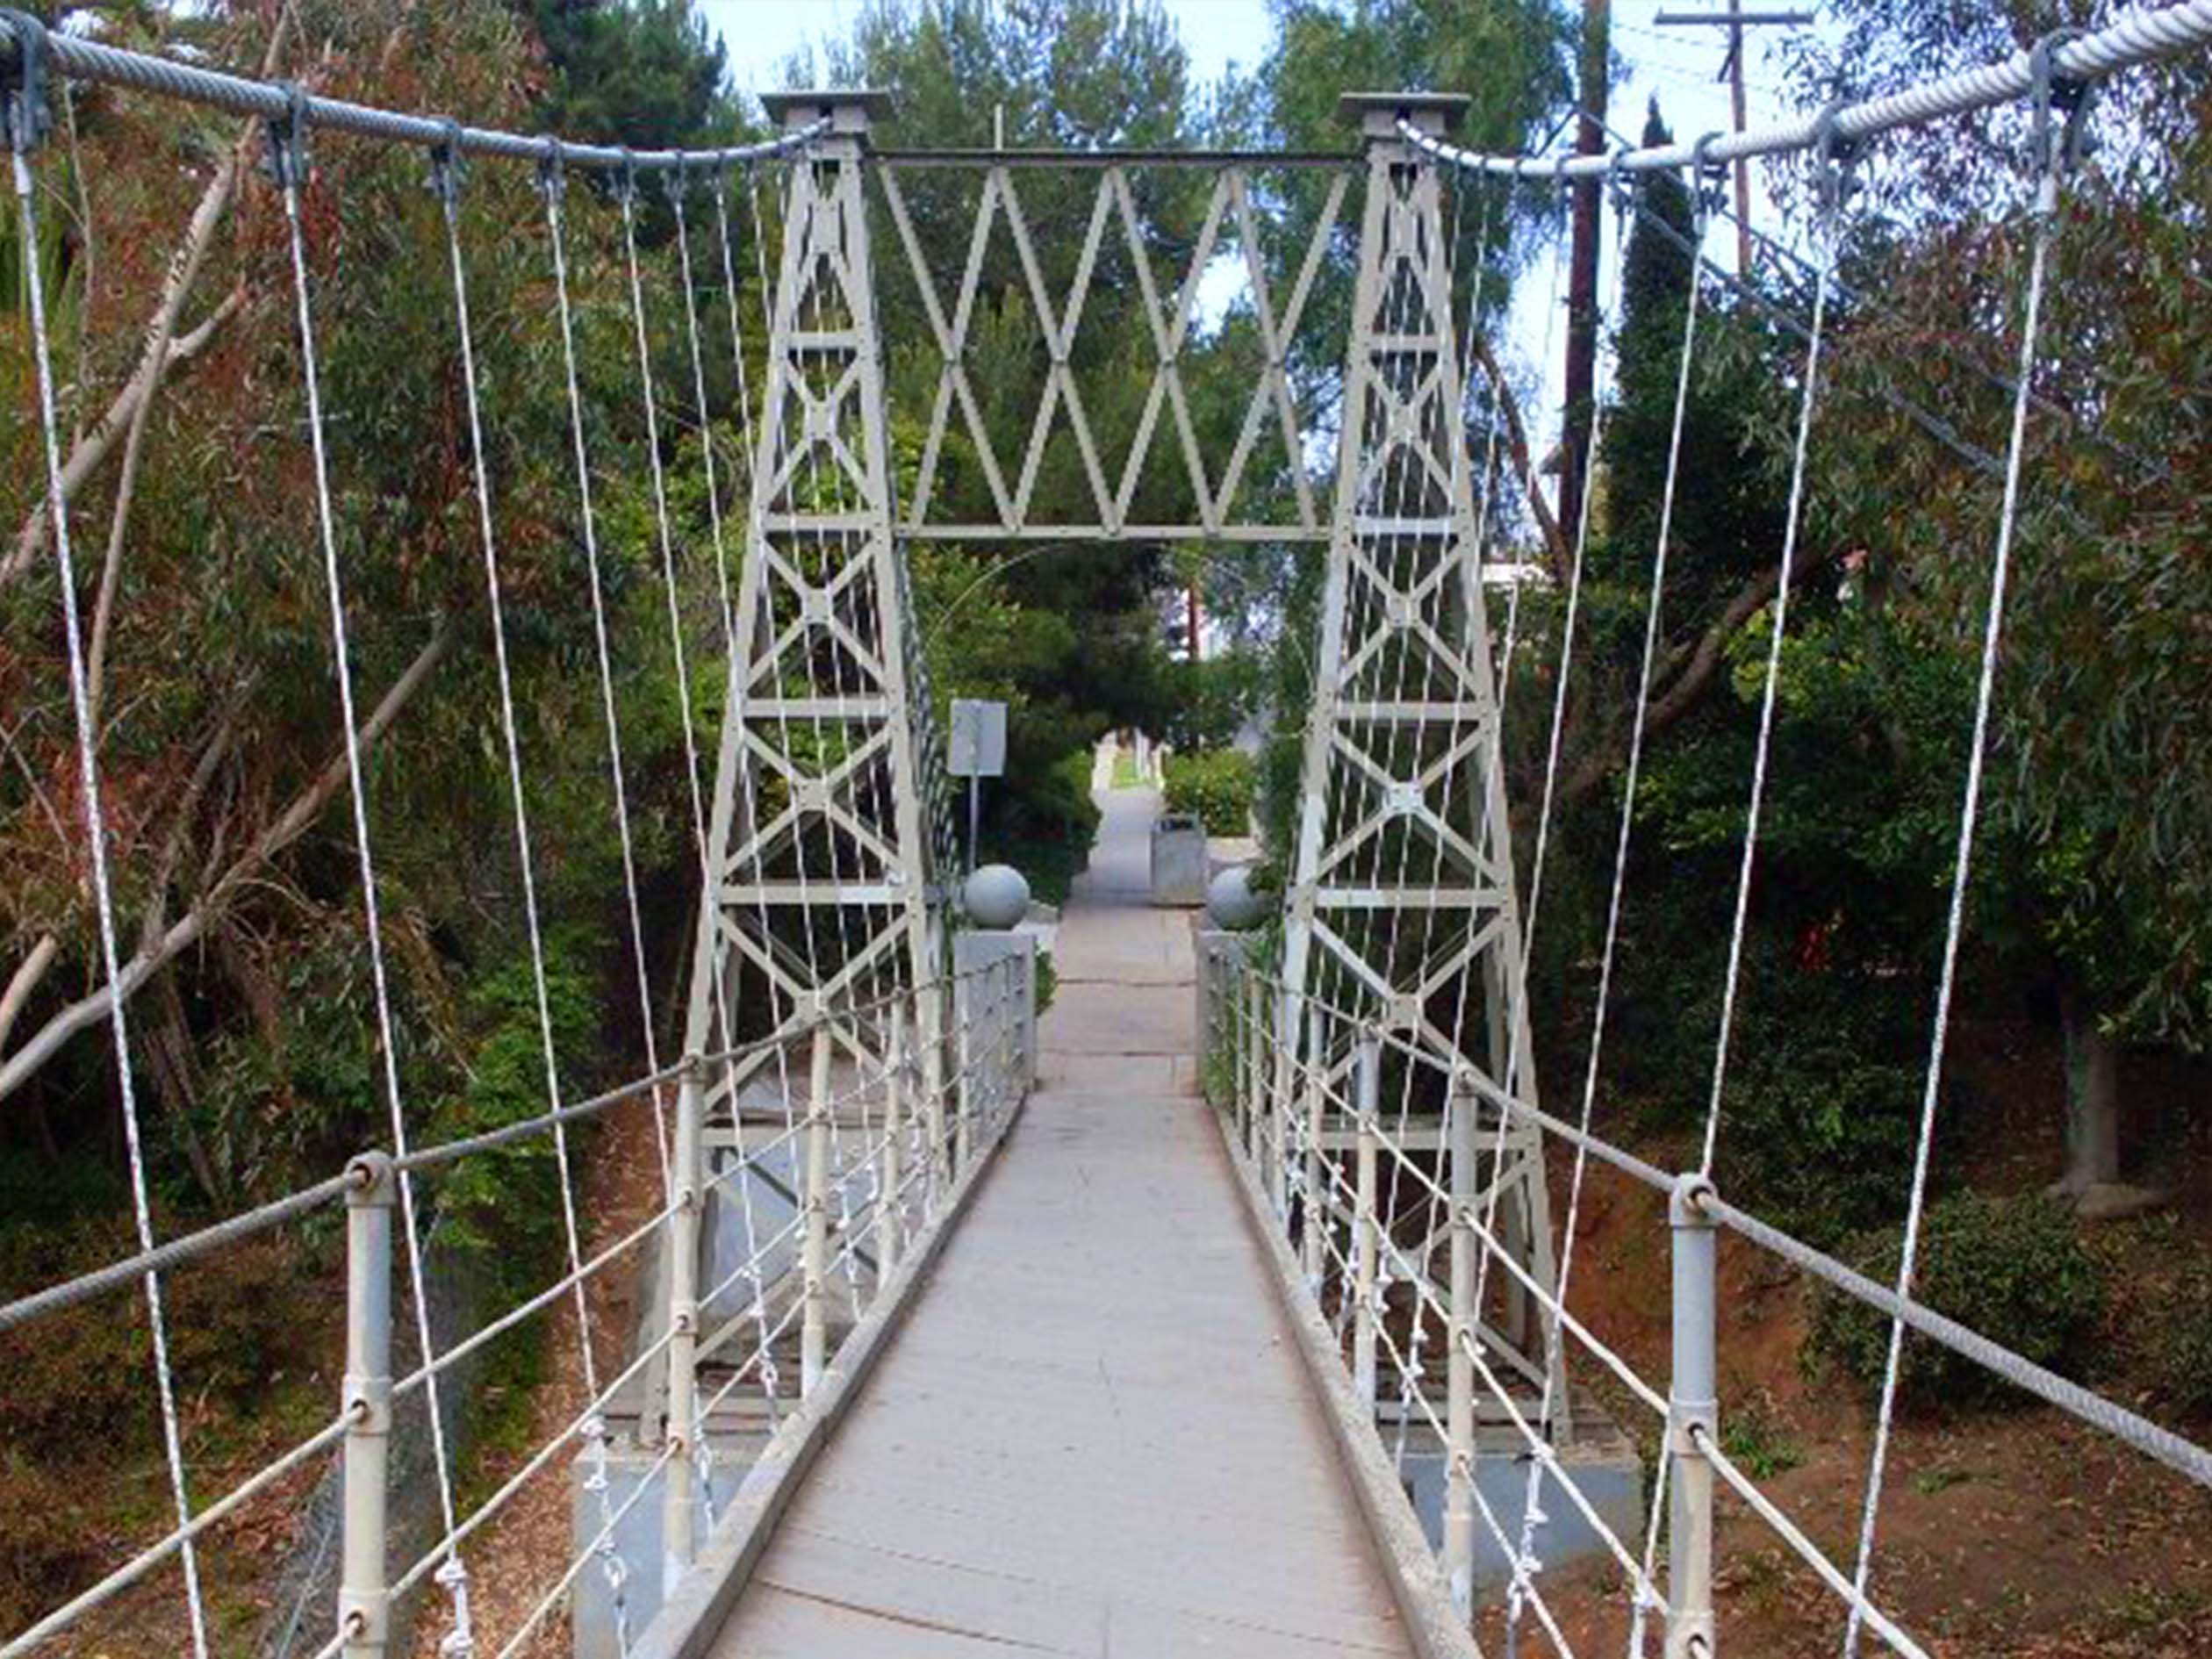 A photo from the middle of spruce street suspension bridge looking forward down the rest of the bridge, with trees on either side.